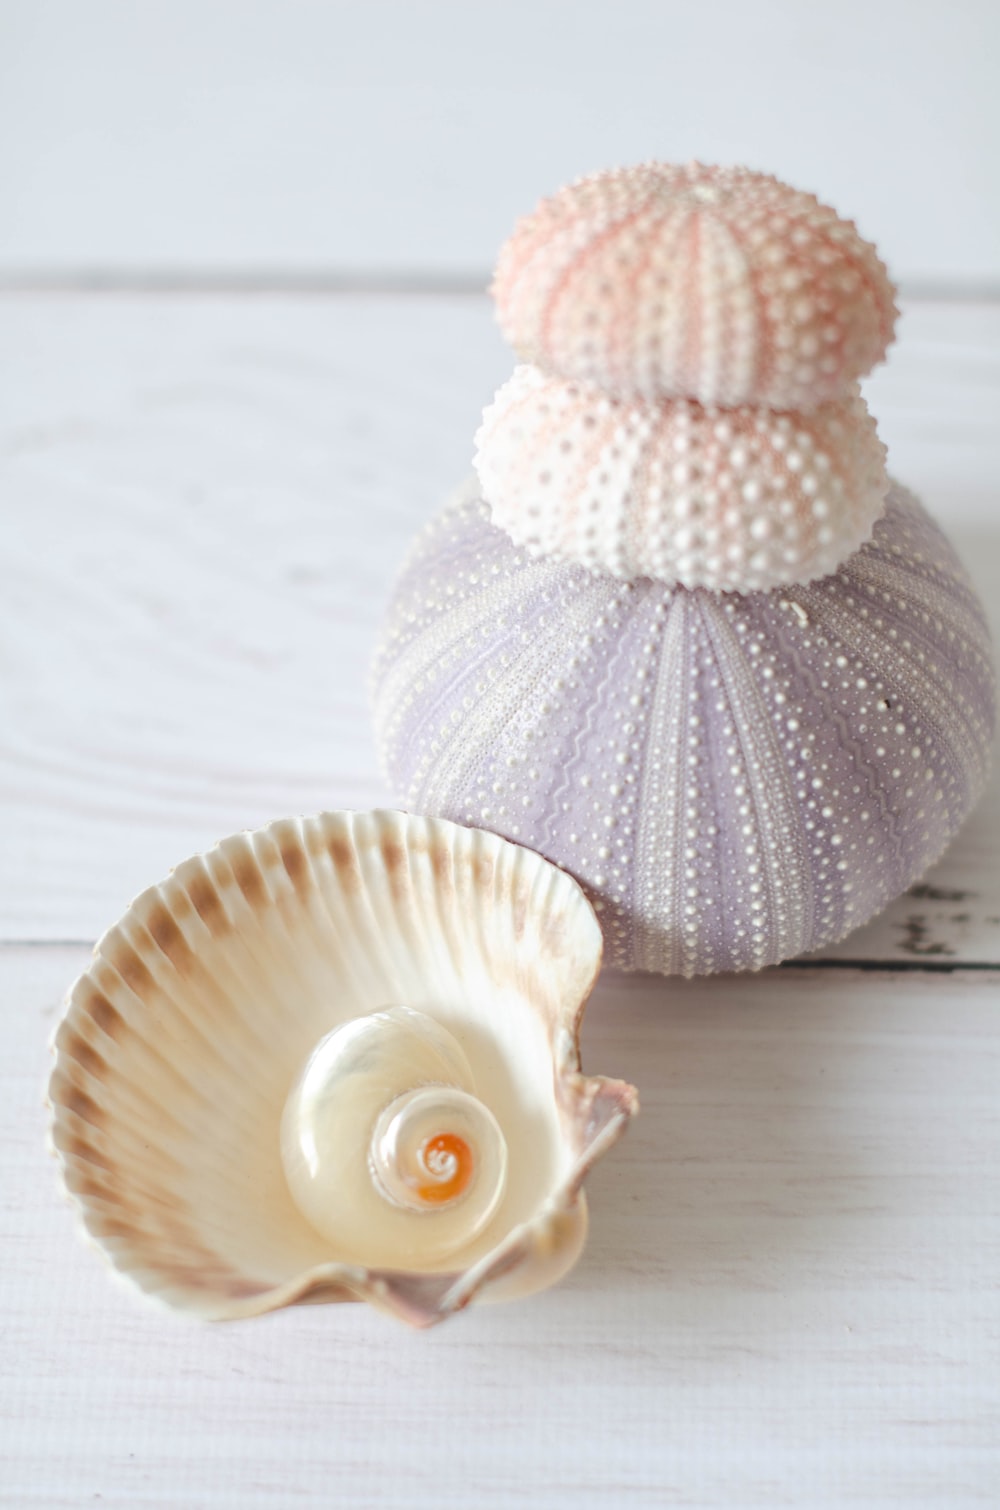 two seashells on a white wooden surface